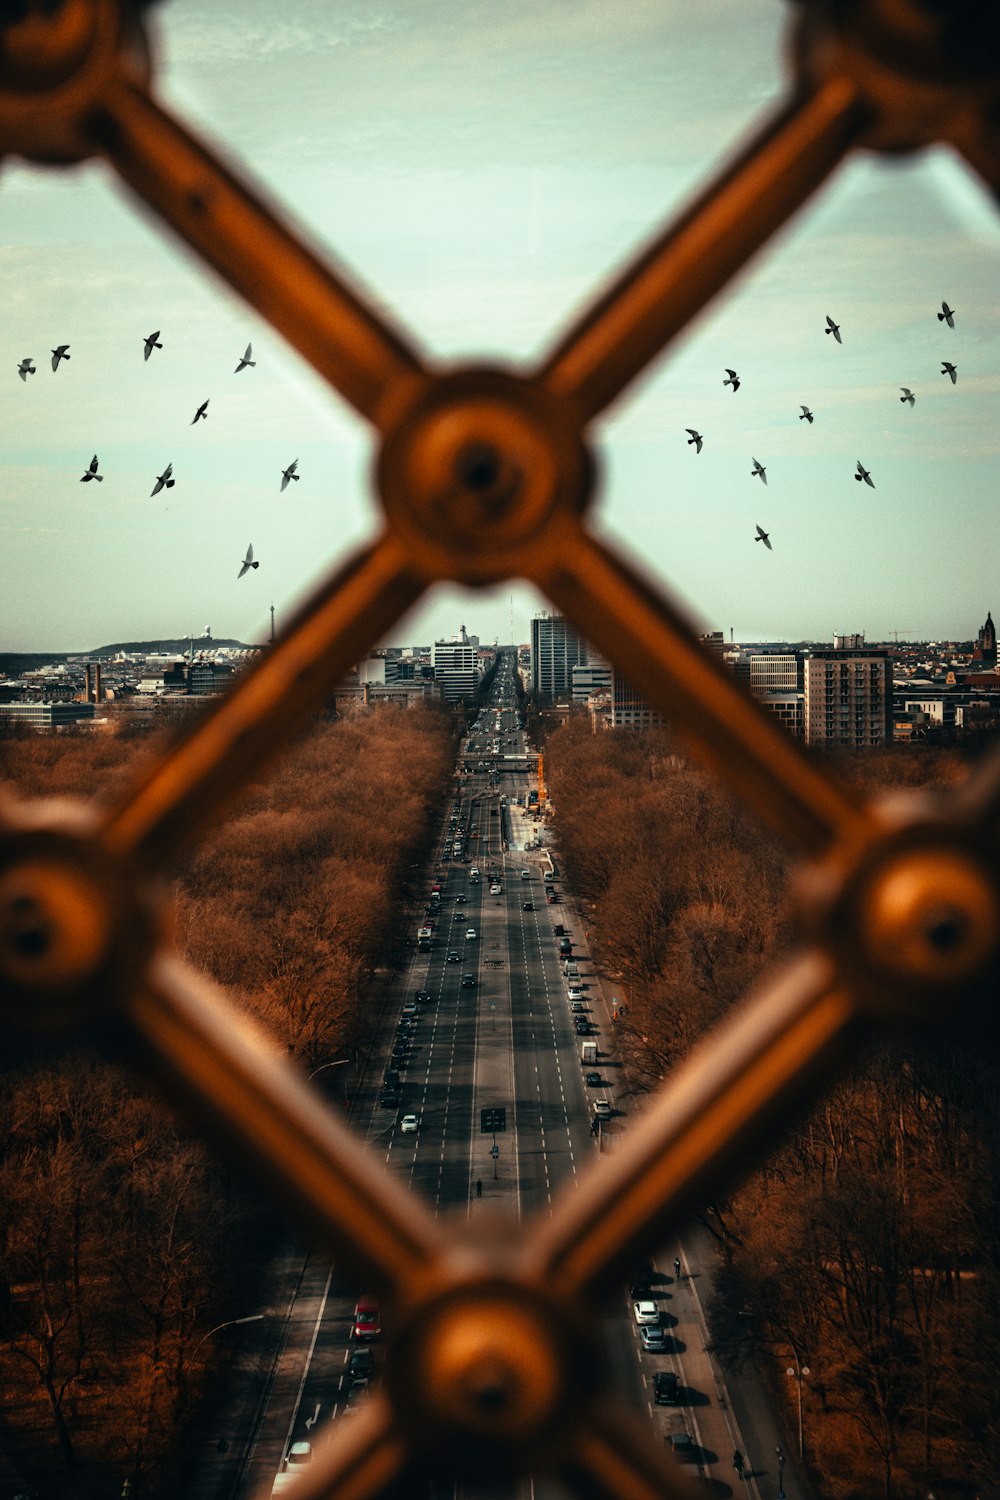 a view of a highway through a window